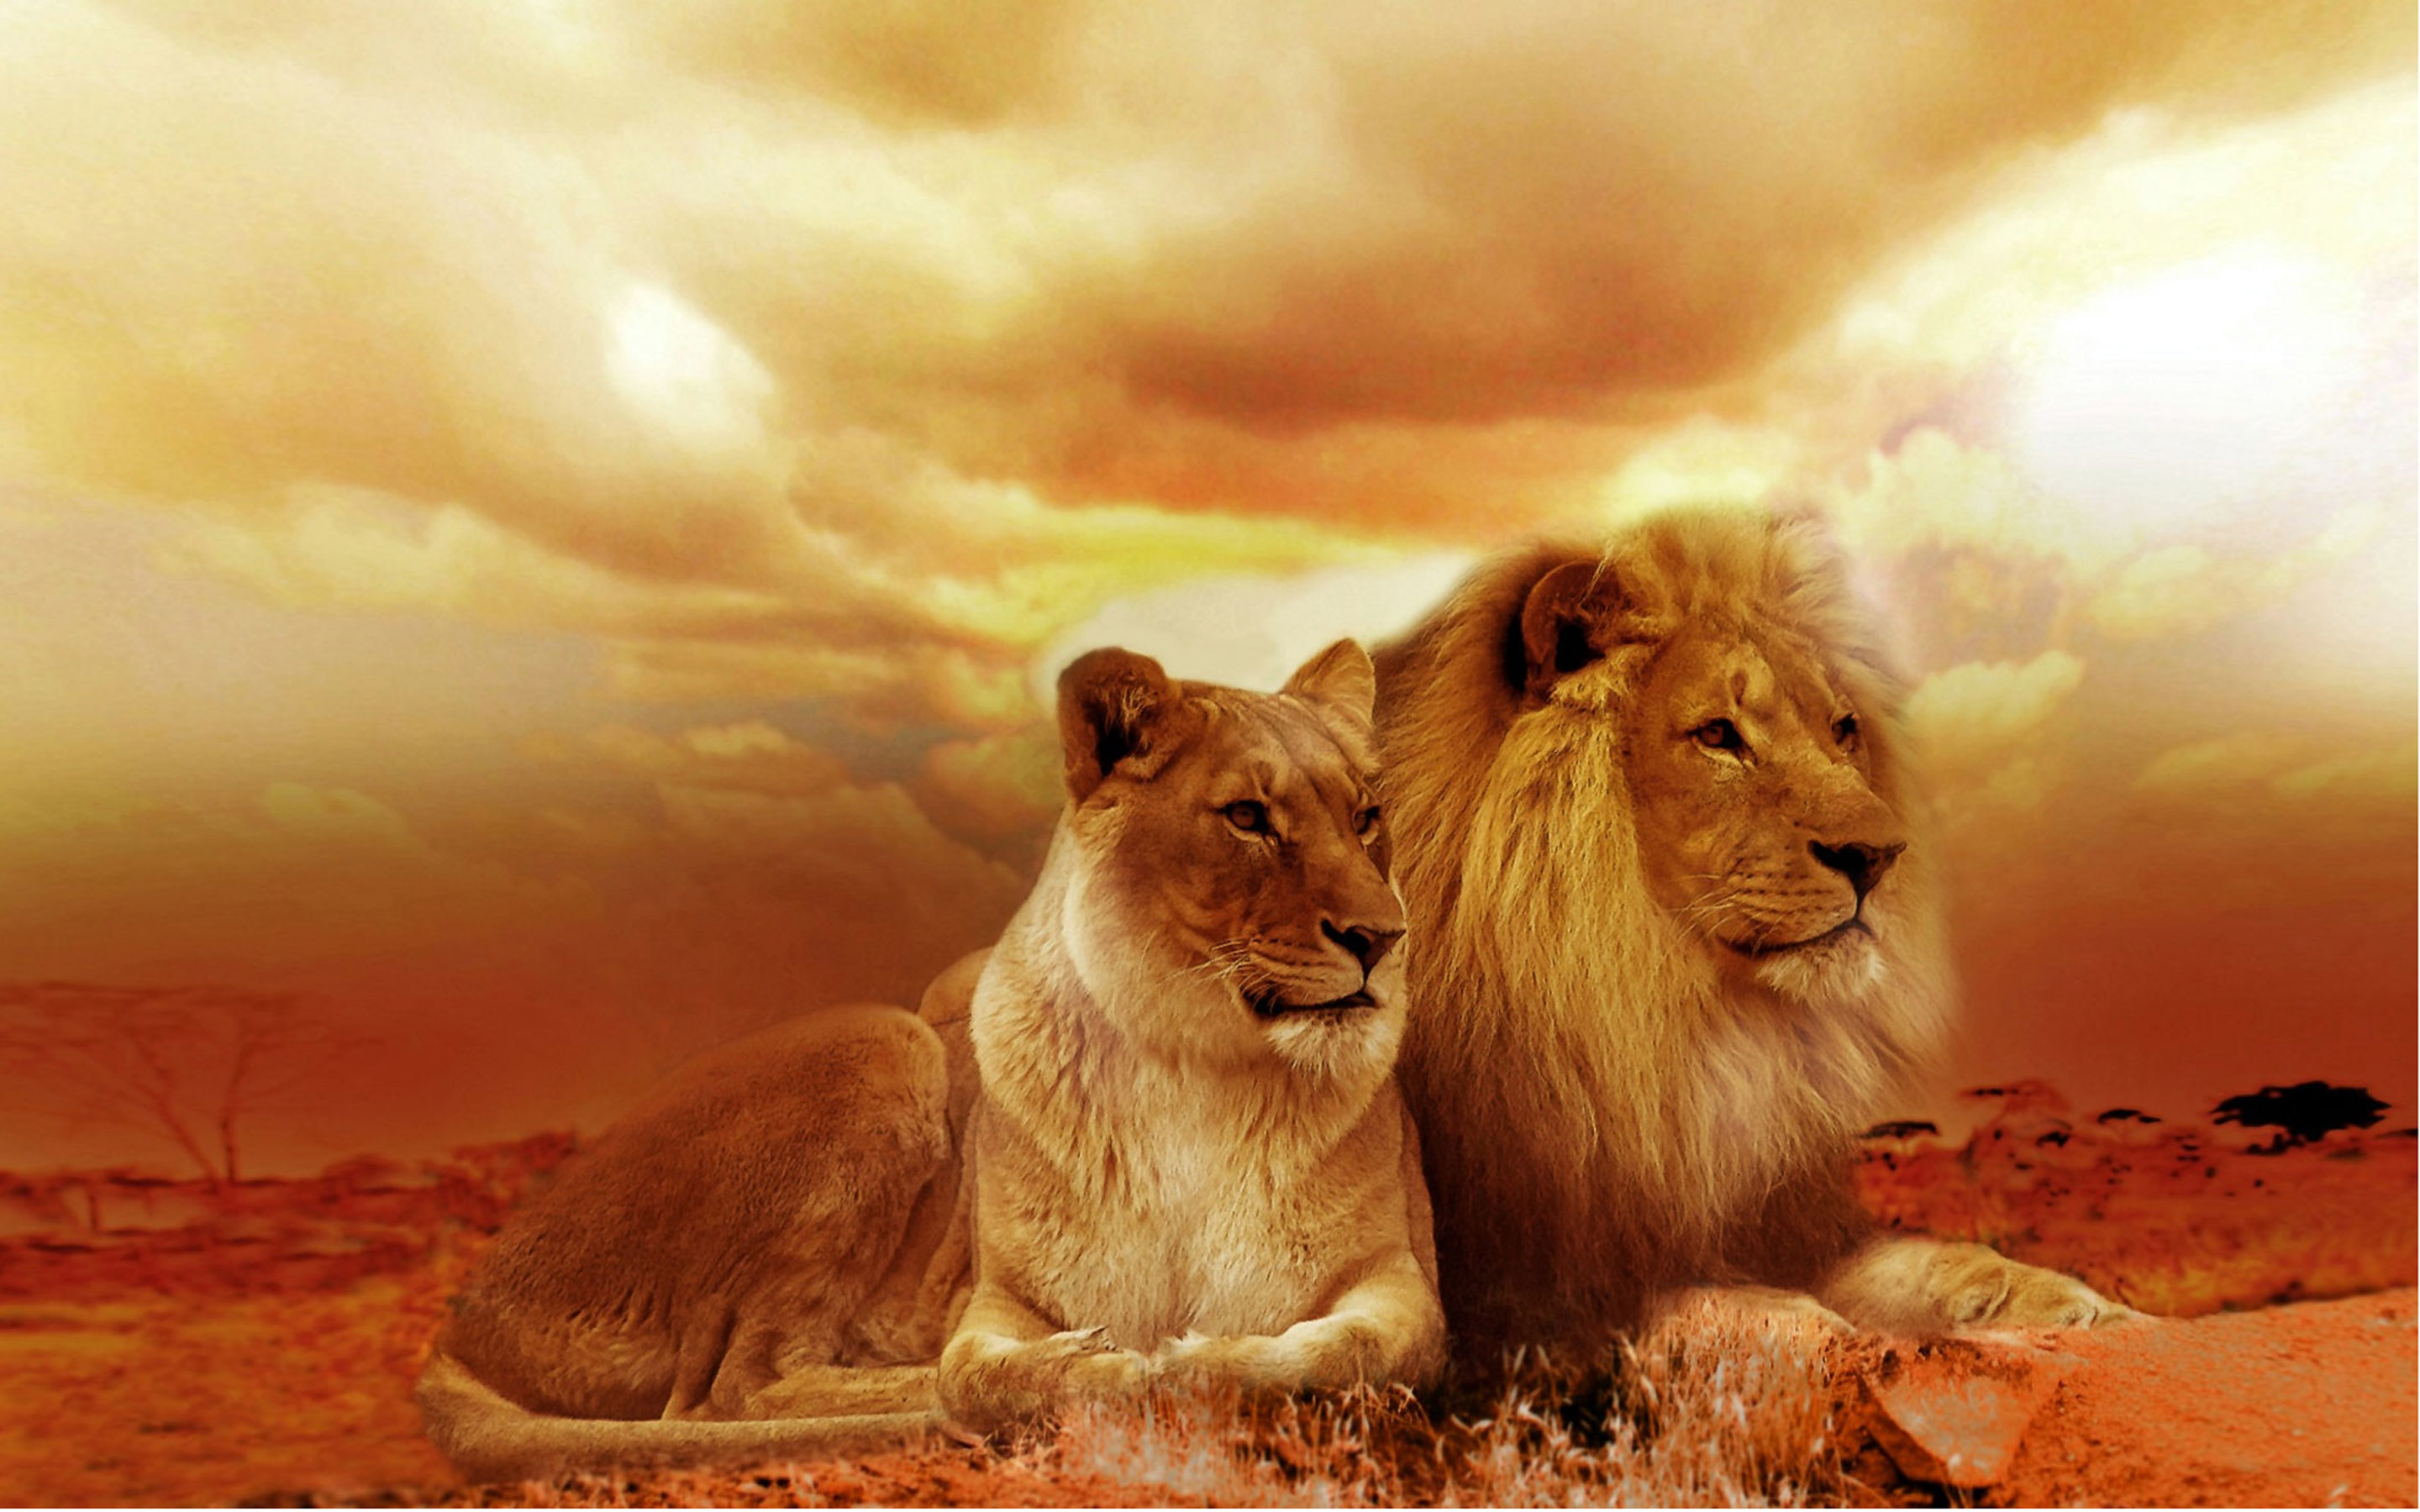 Lion King & Lioness Queen of the Jungle Framed Wall Art - FRAMED ART from  Fab Home Interiors UK